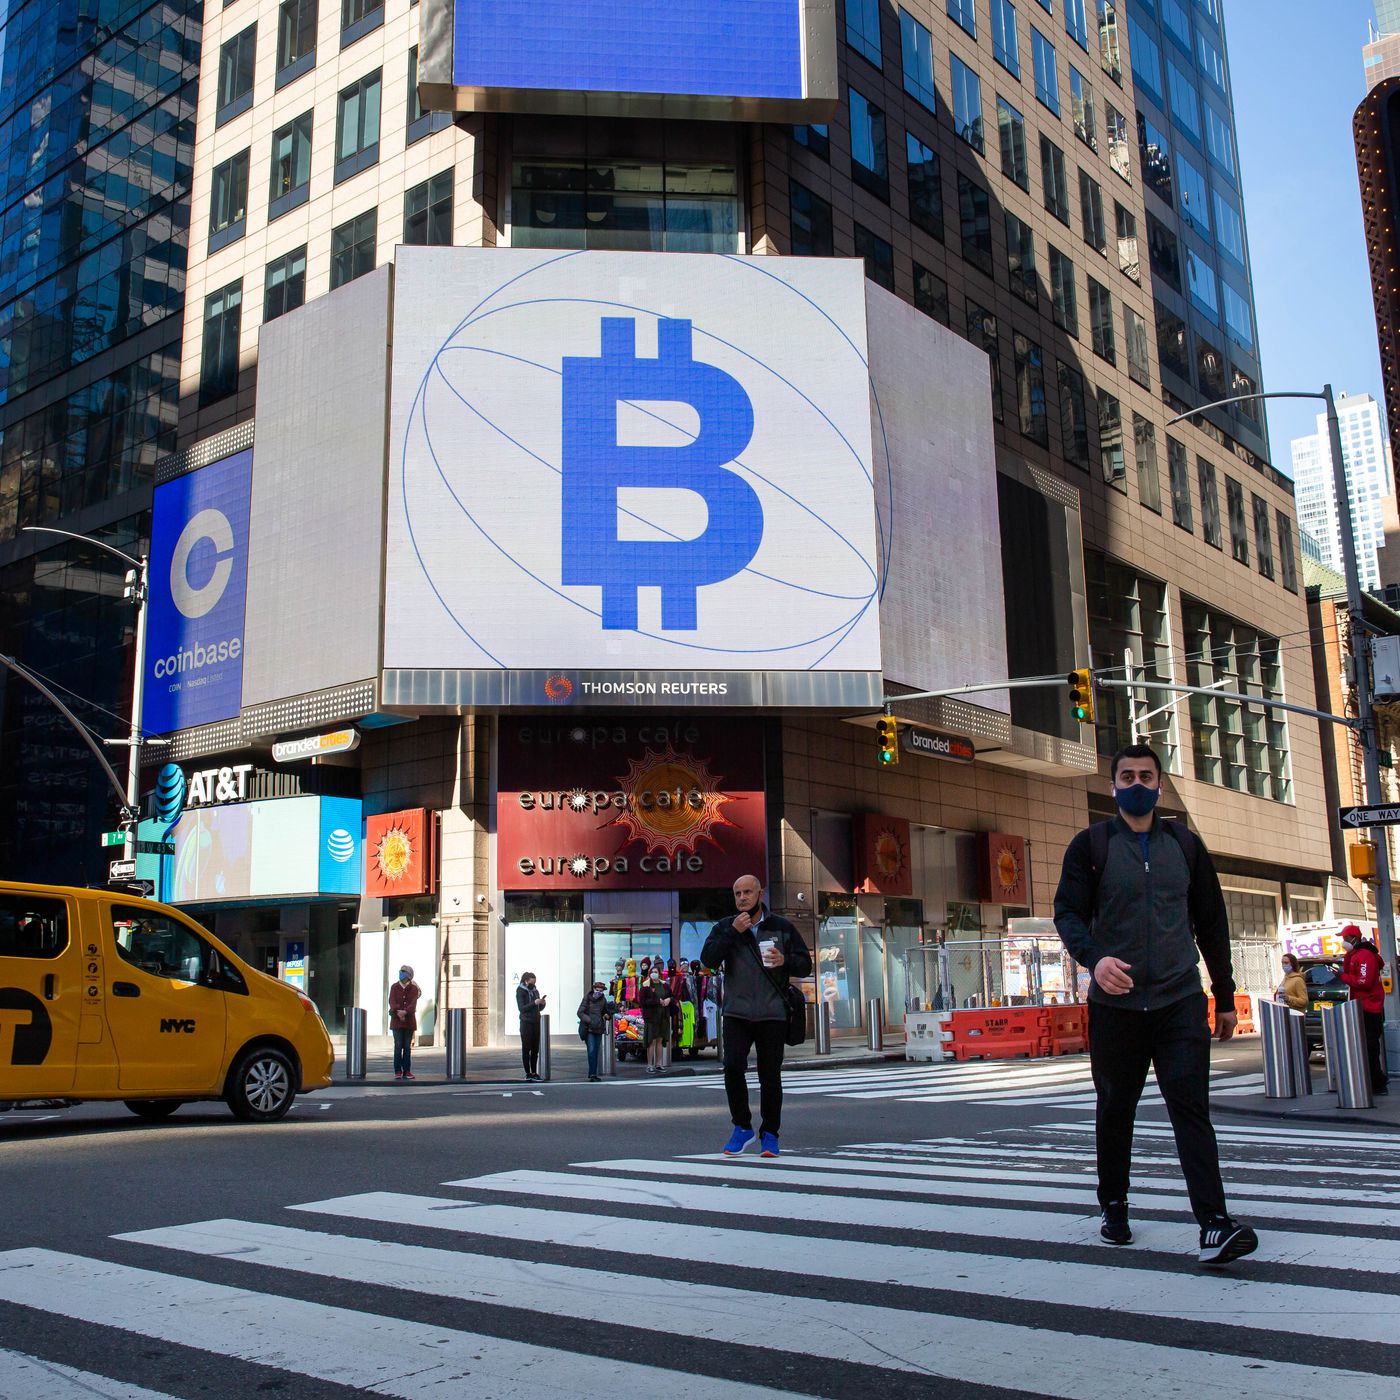 New York is now the center of crypto | Fortune Crypto